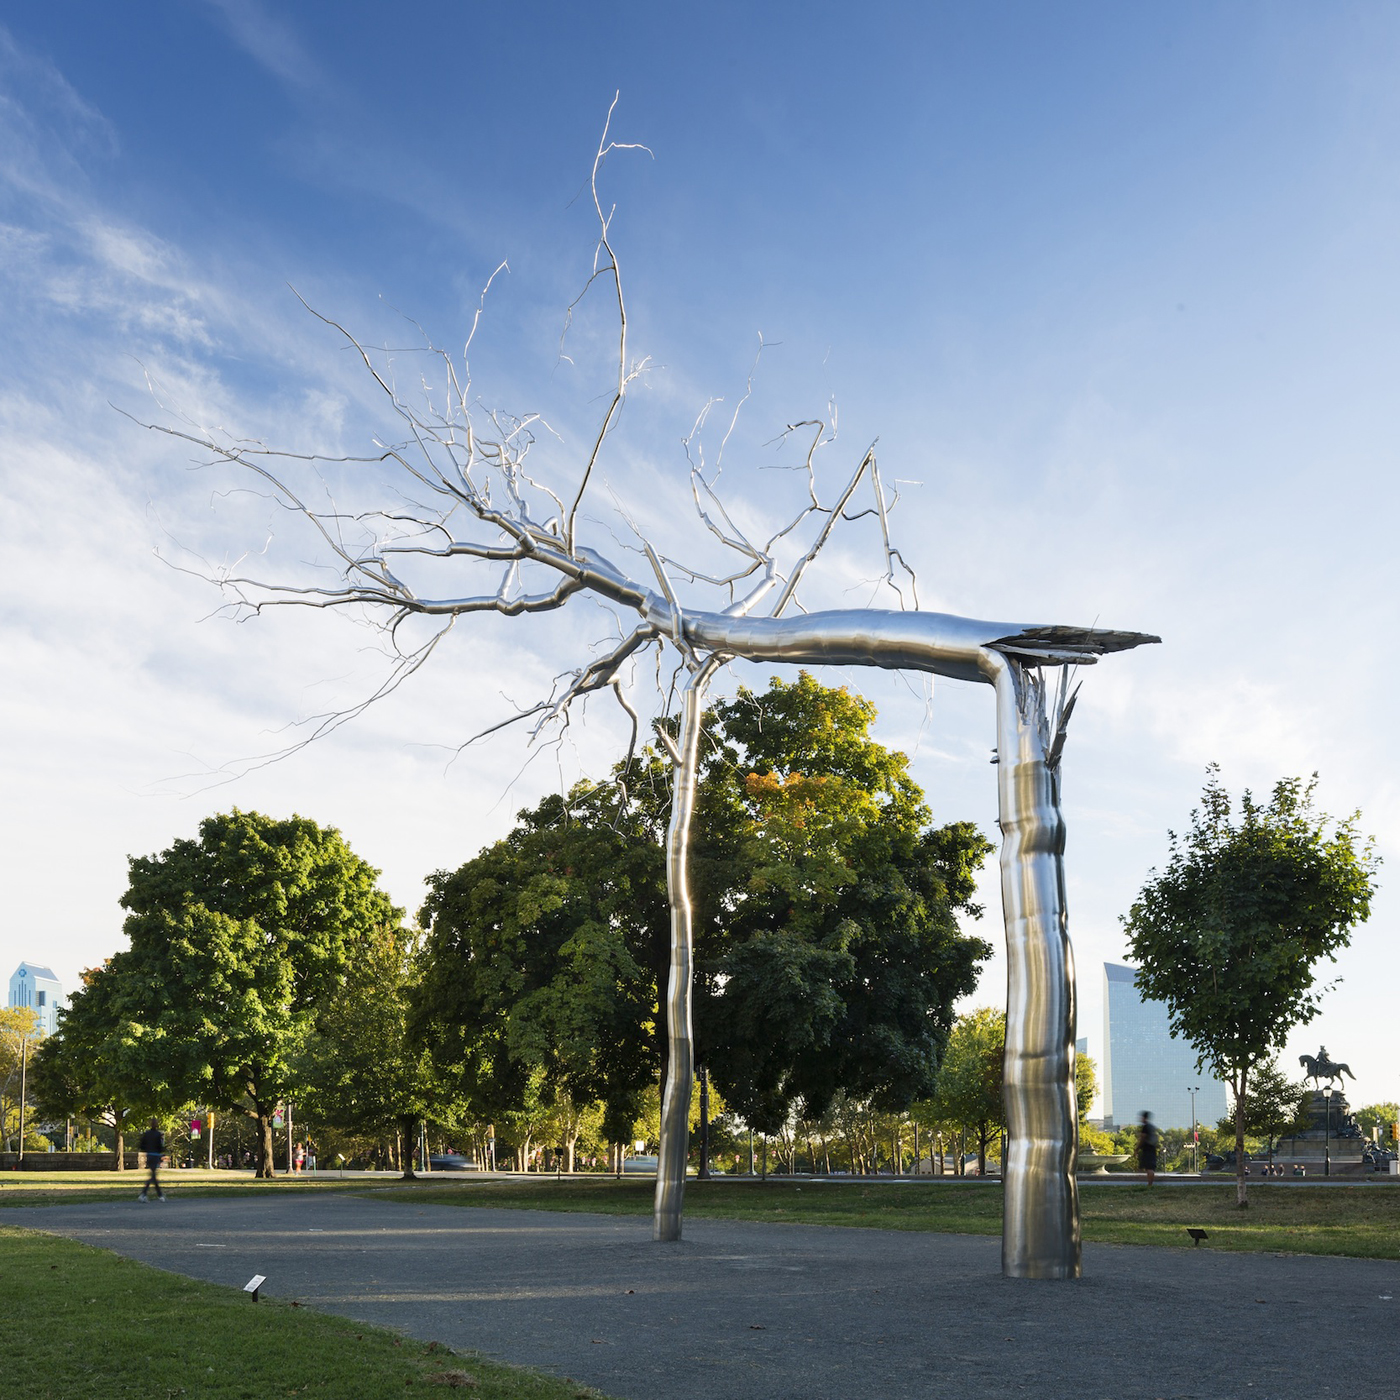 Symbiosis by Roxy Paine